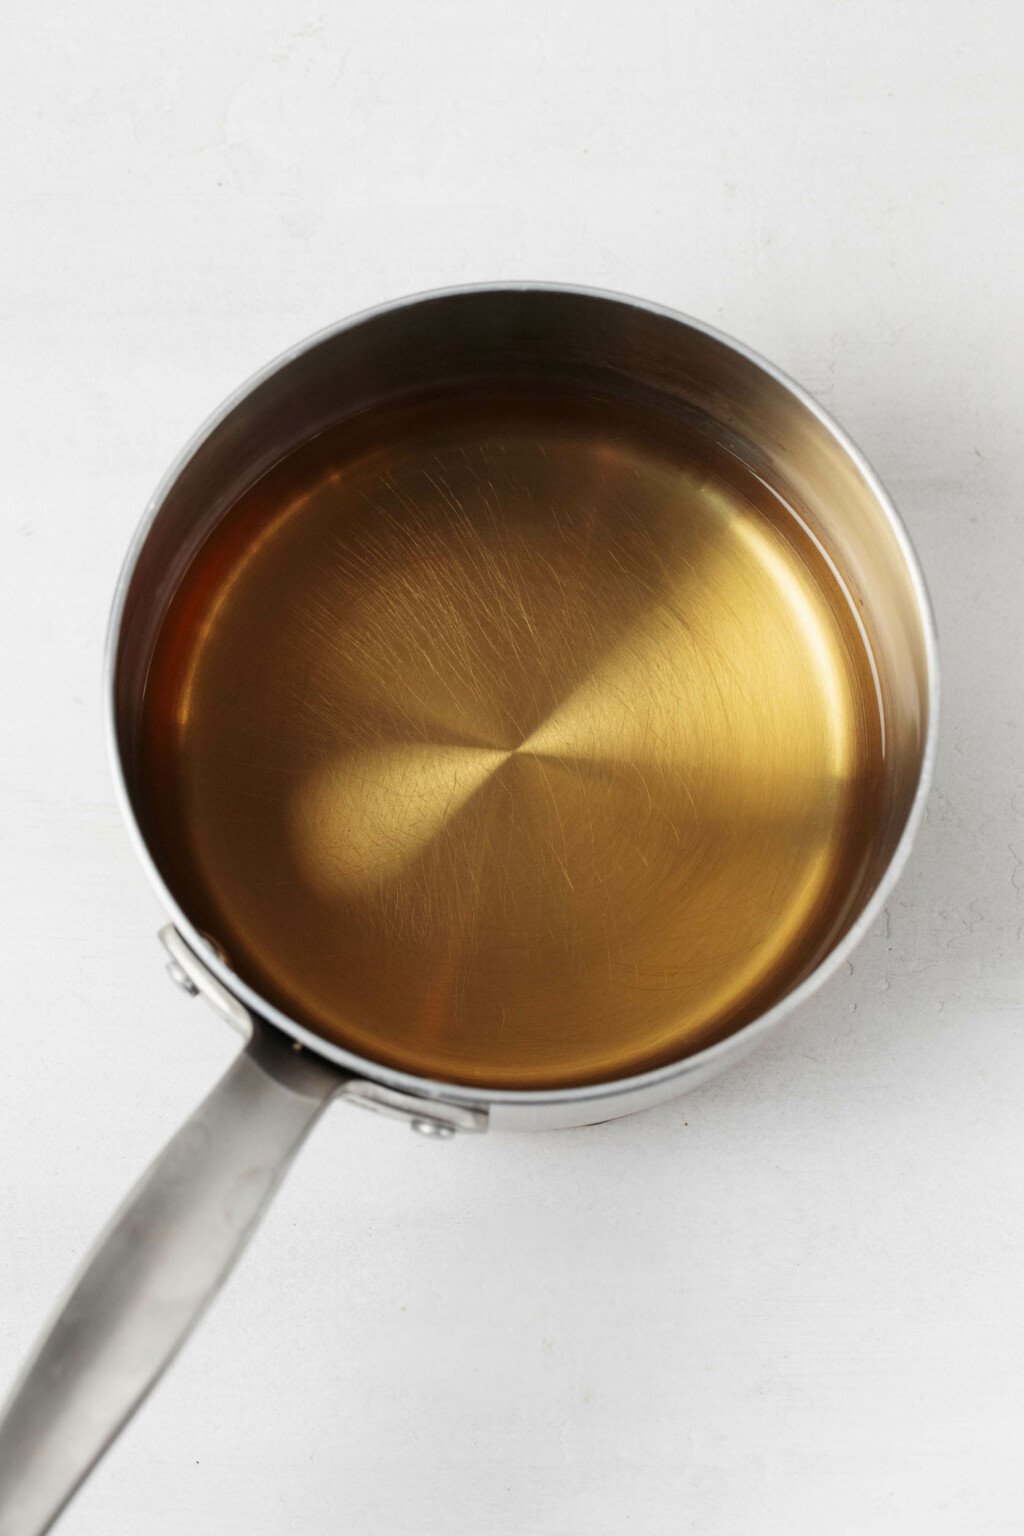 A small, silver saucepan contains a mixture of vinegar and water. It's resting on a white surface.